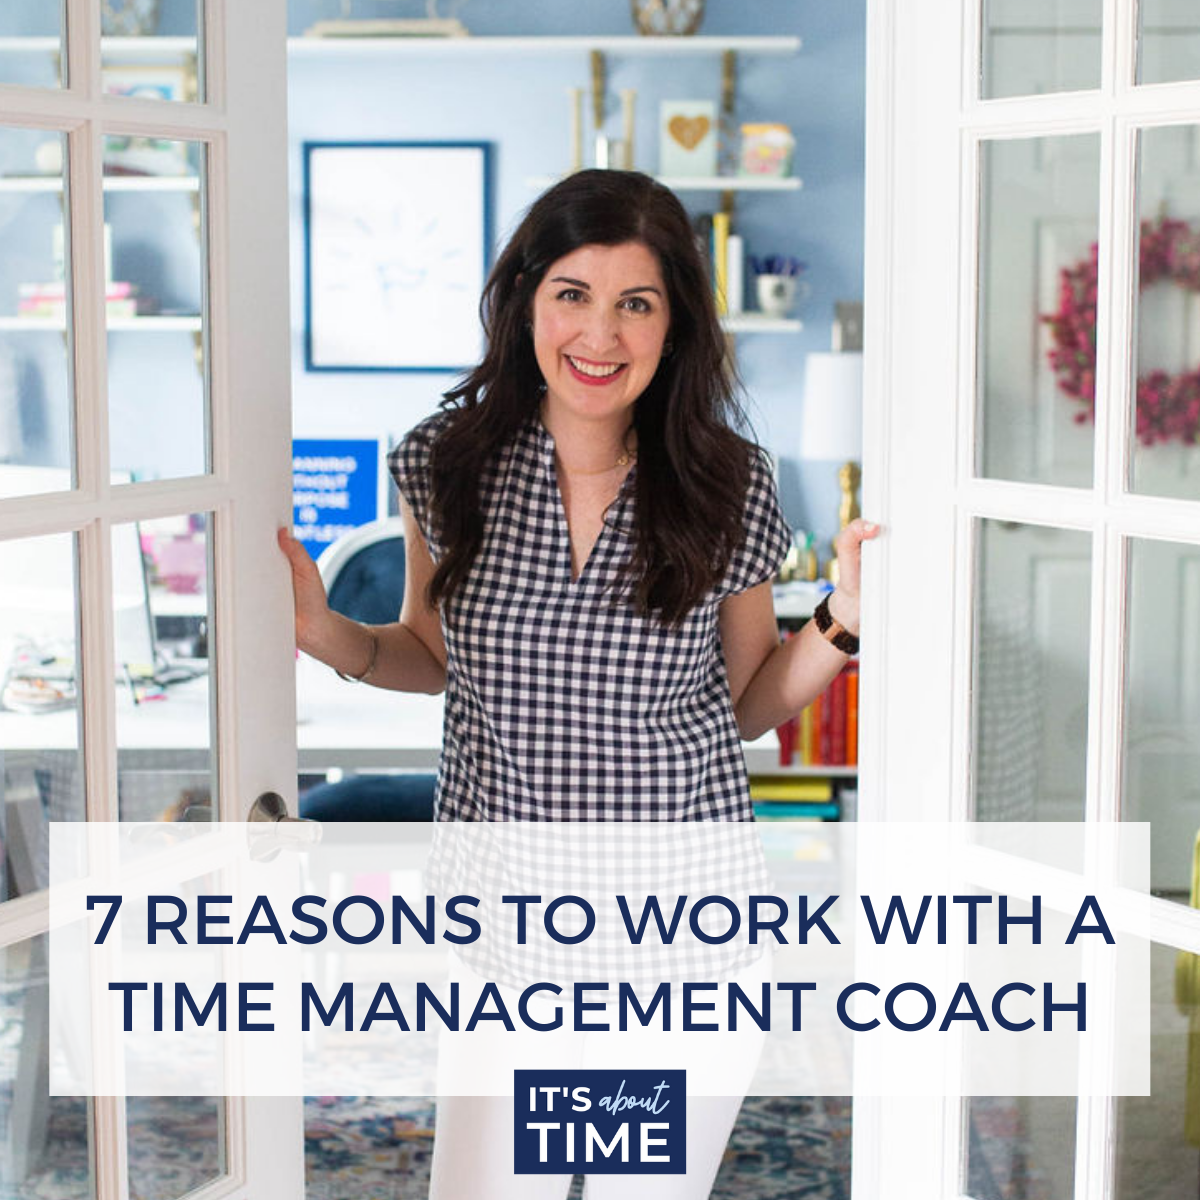 7 Reasons to Work with a Time Management Coach